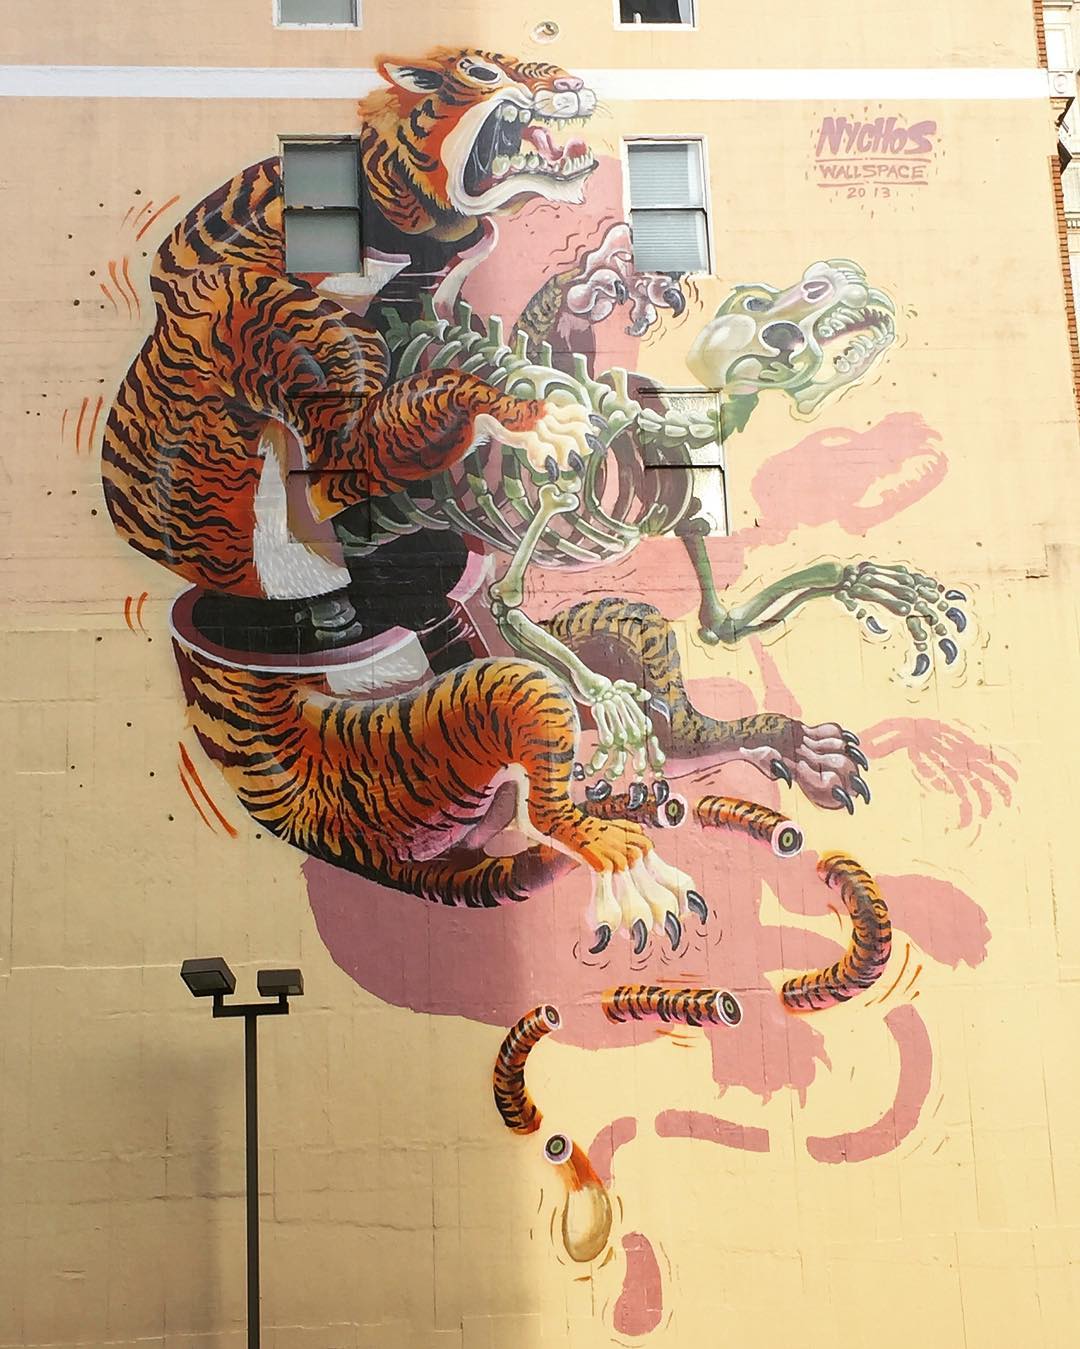 mural in San Francisco by artist Nychos. Tagged: animals